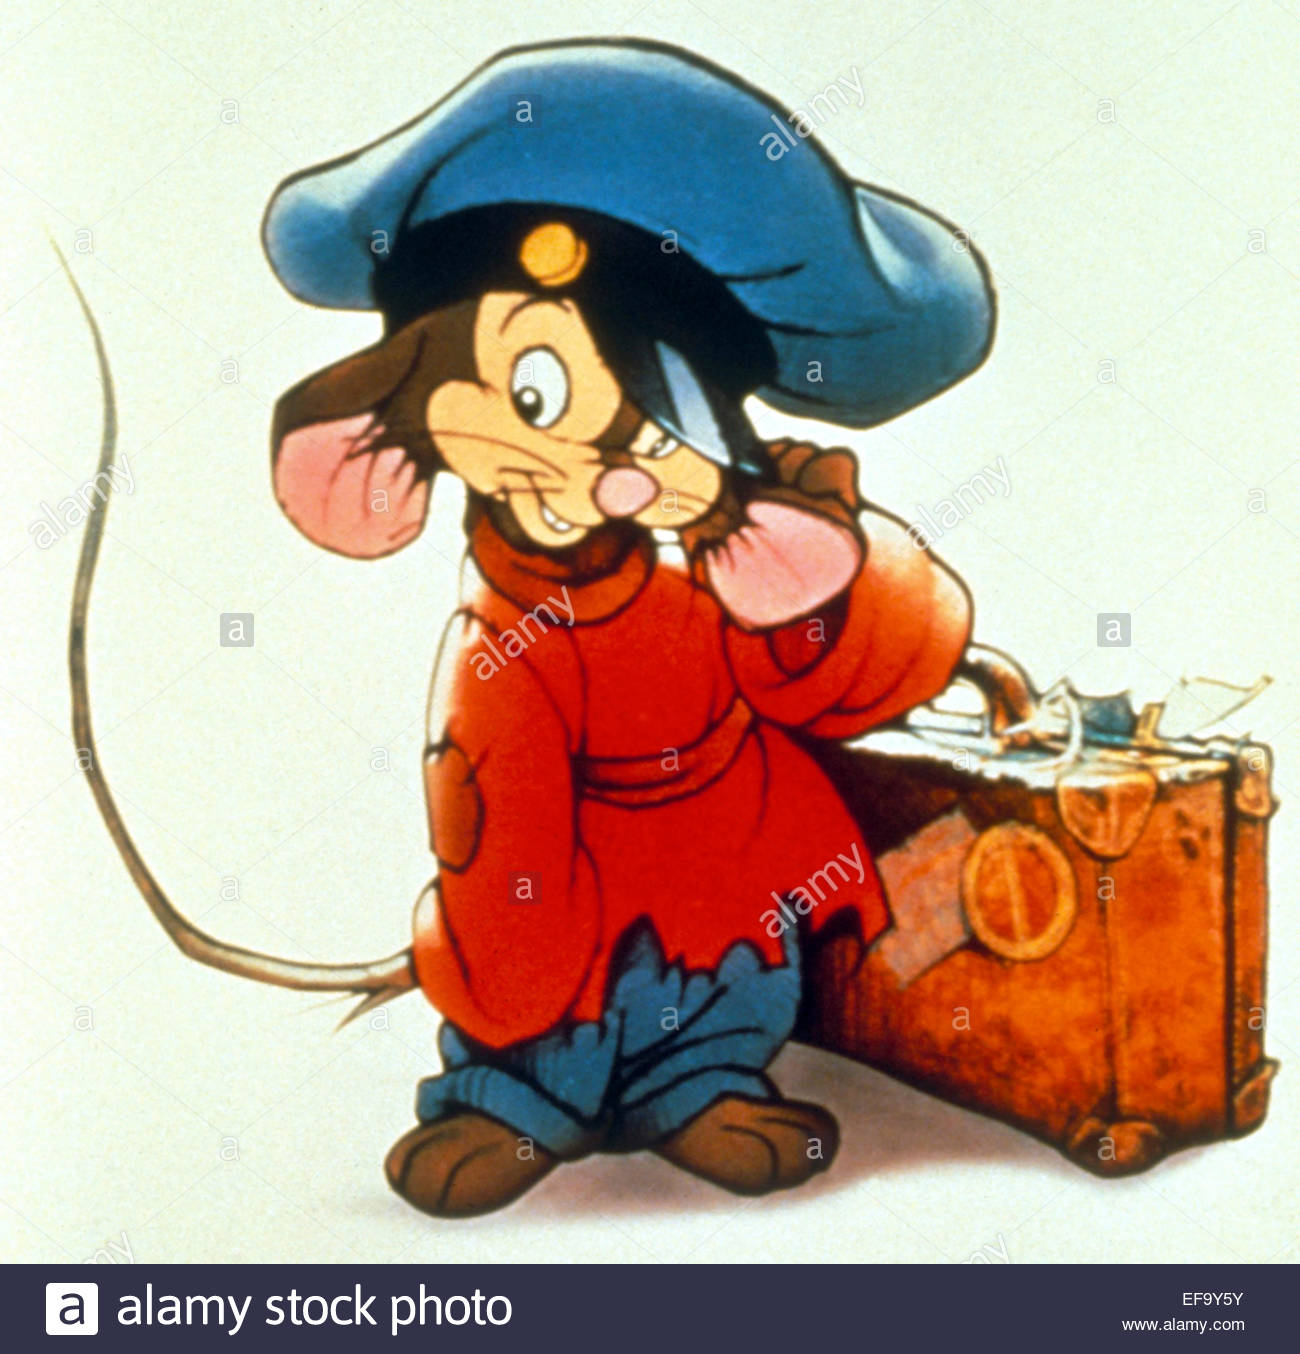 An American Tail High Quality Background on Wallpapers Vista